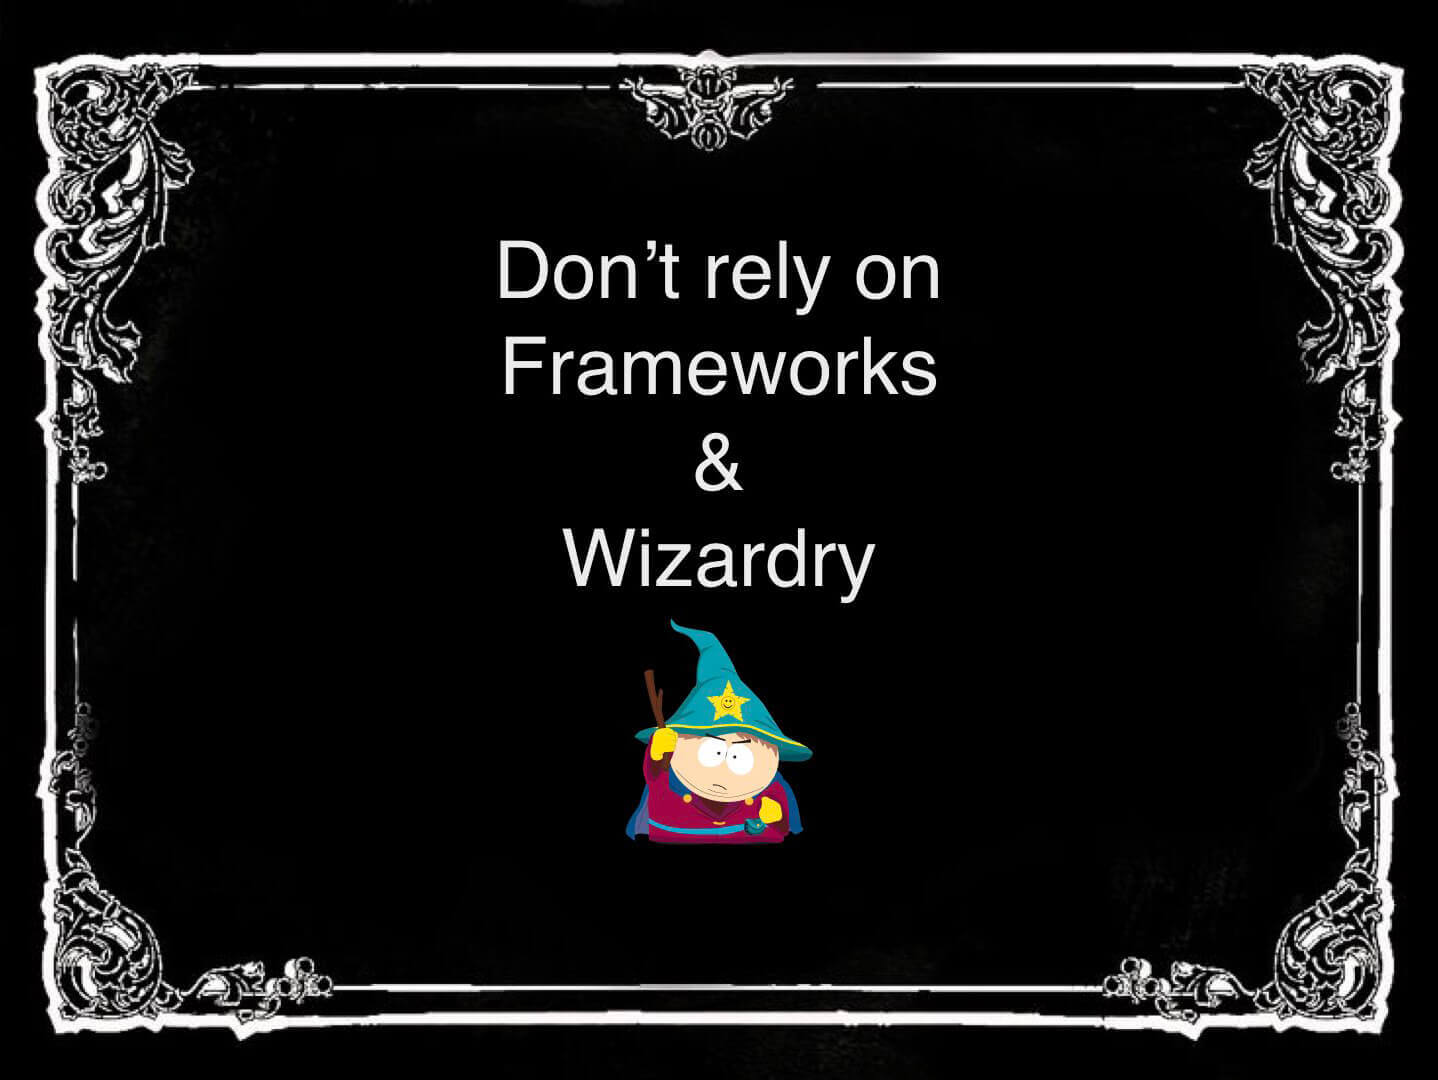 Daniel Khan thinks you shouldn't rely on frameworks and wizardry